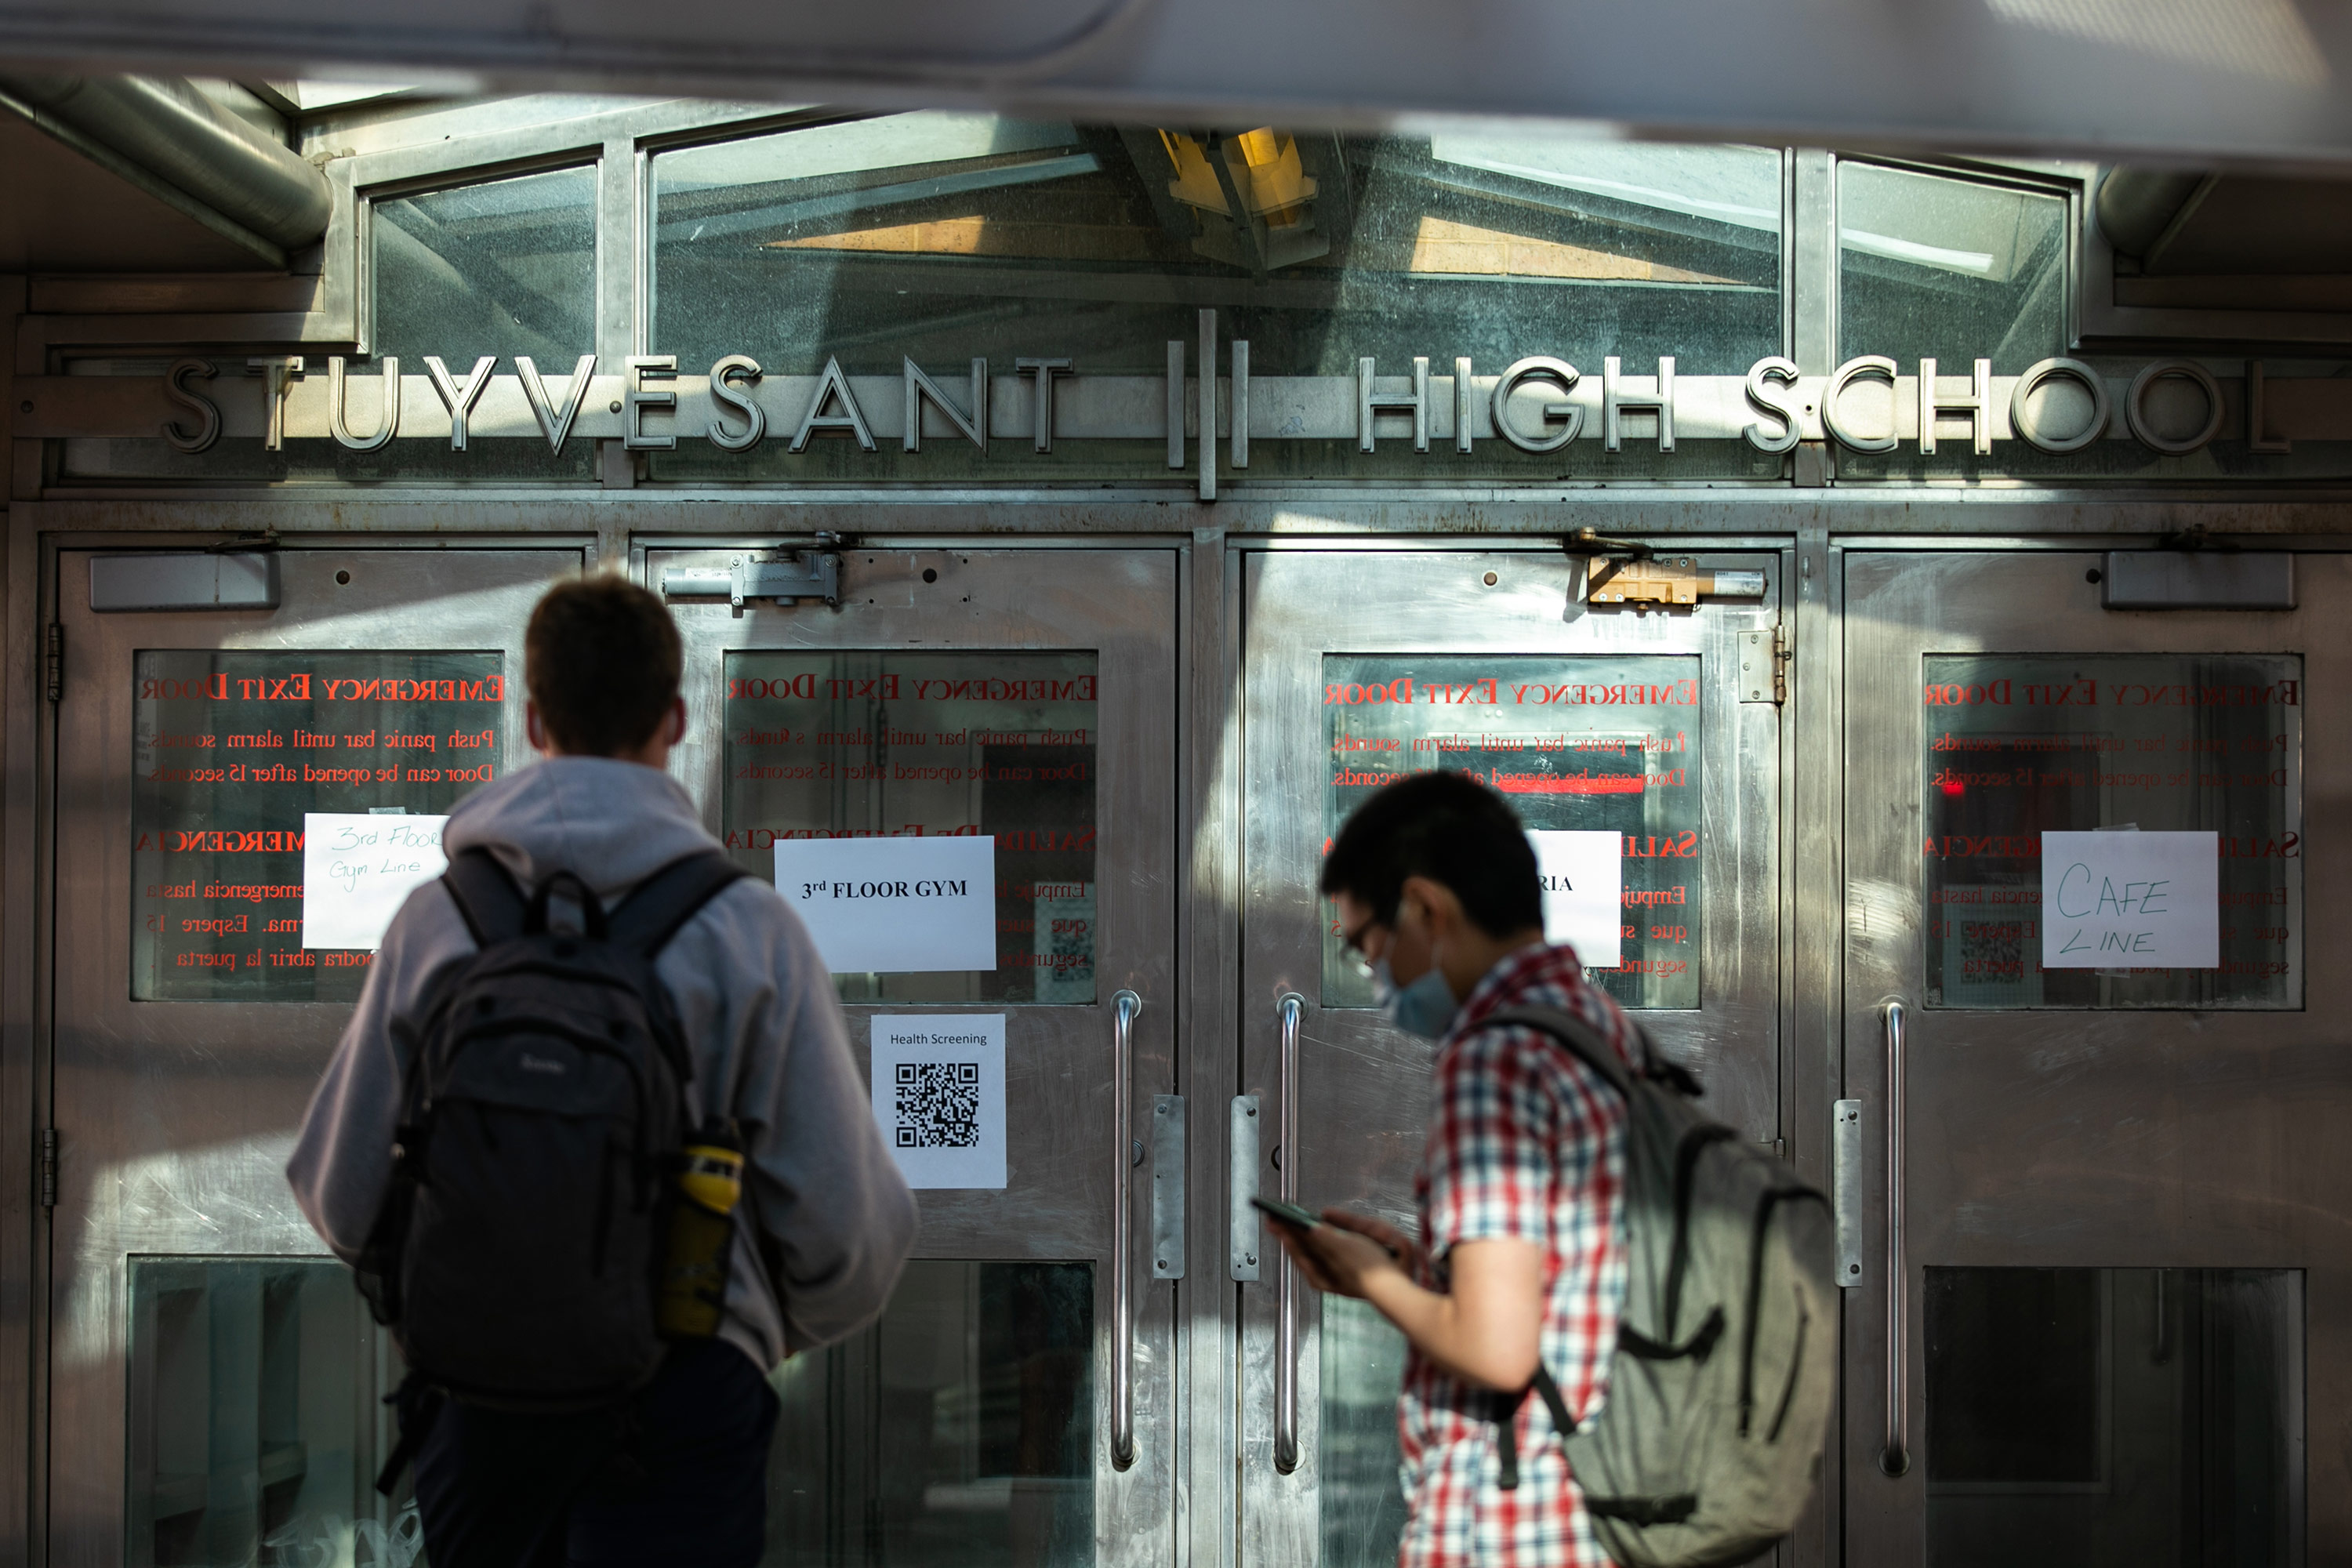 Students arrive at Stuyvesant High School in New York, on October 1, 2020. 